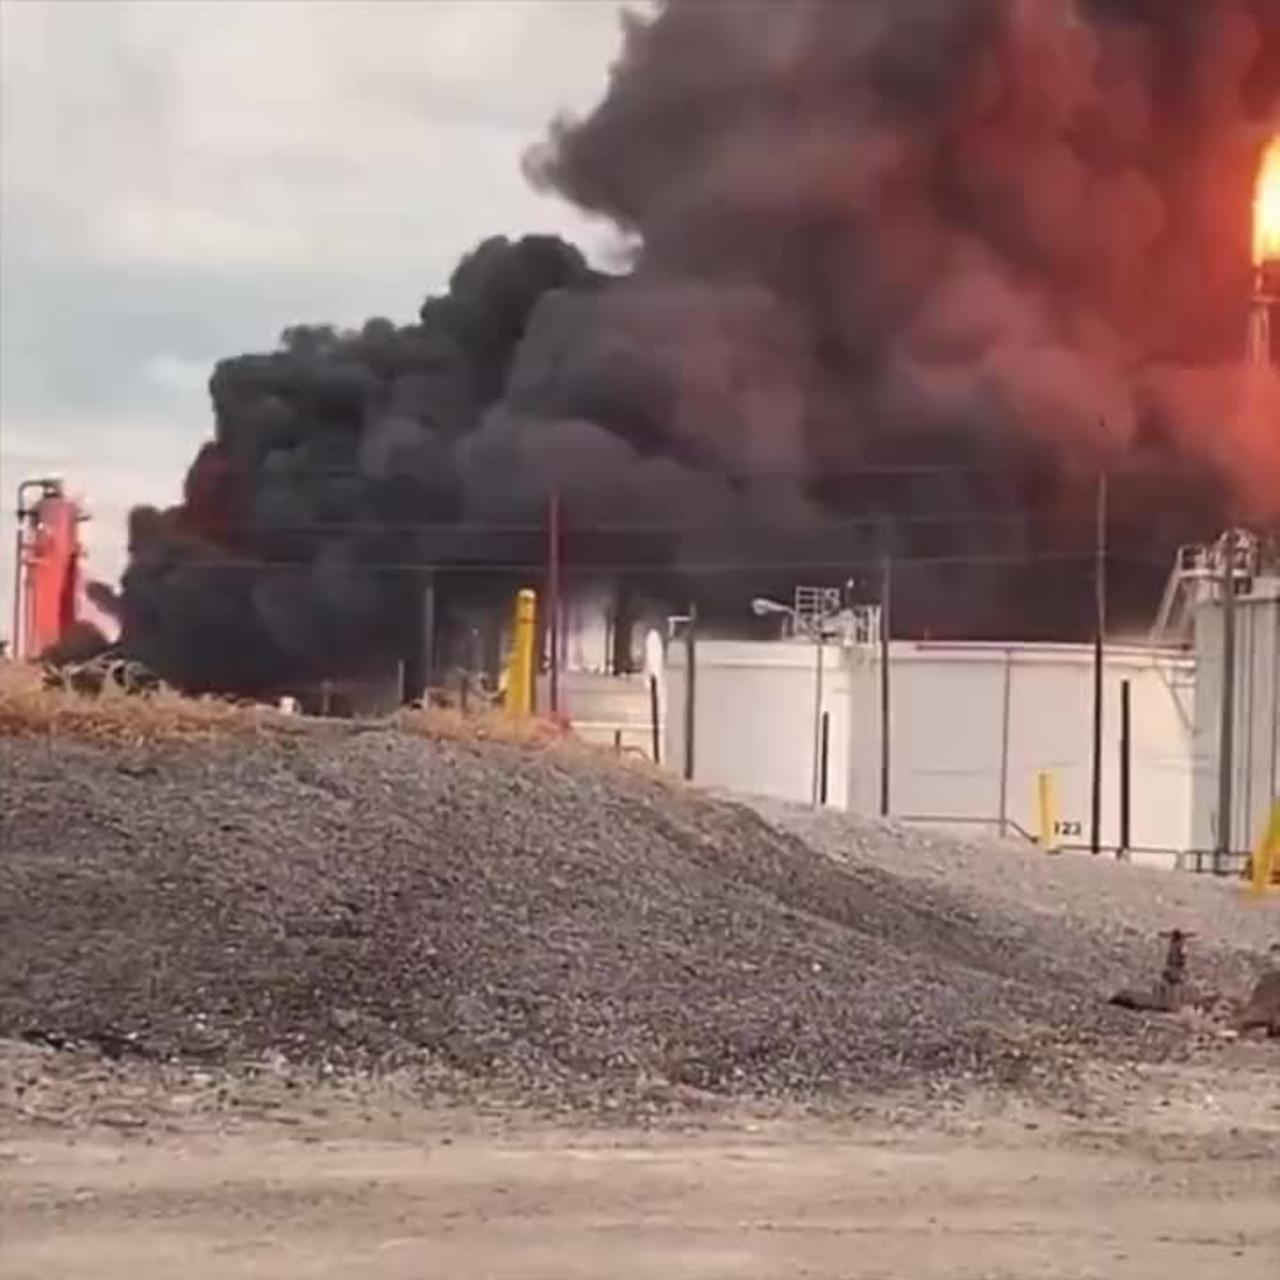 And ANOTHER FIRE at an oil refinery in Toledo, Ohio